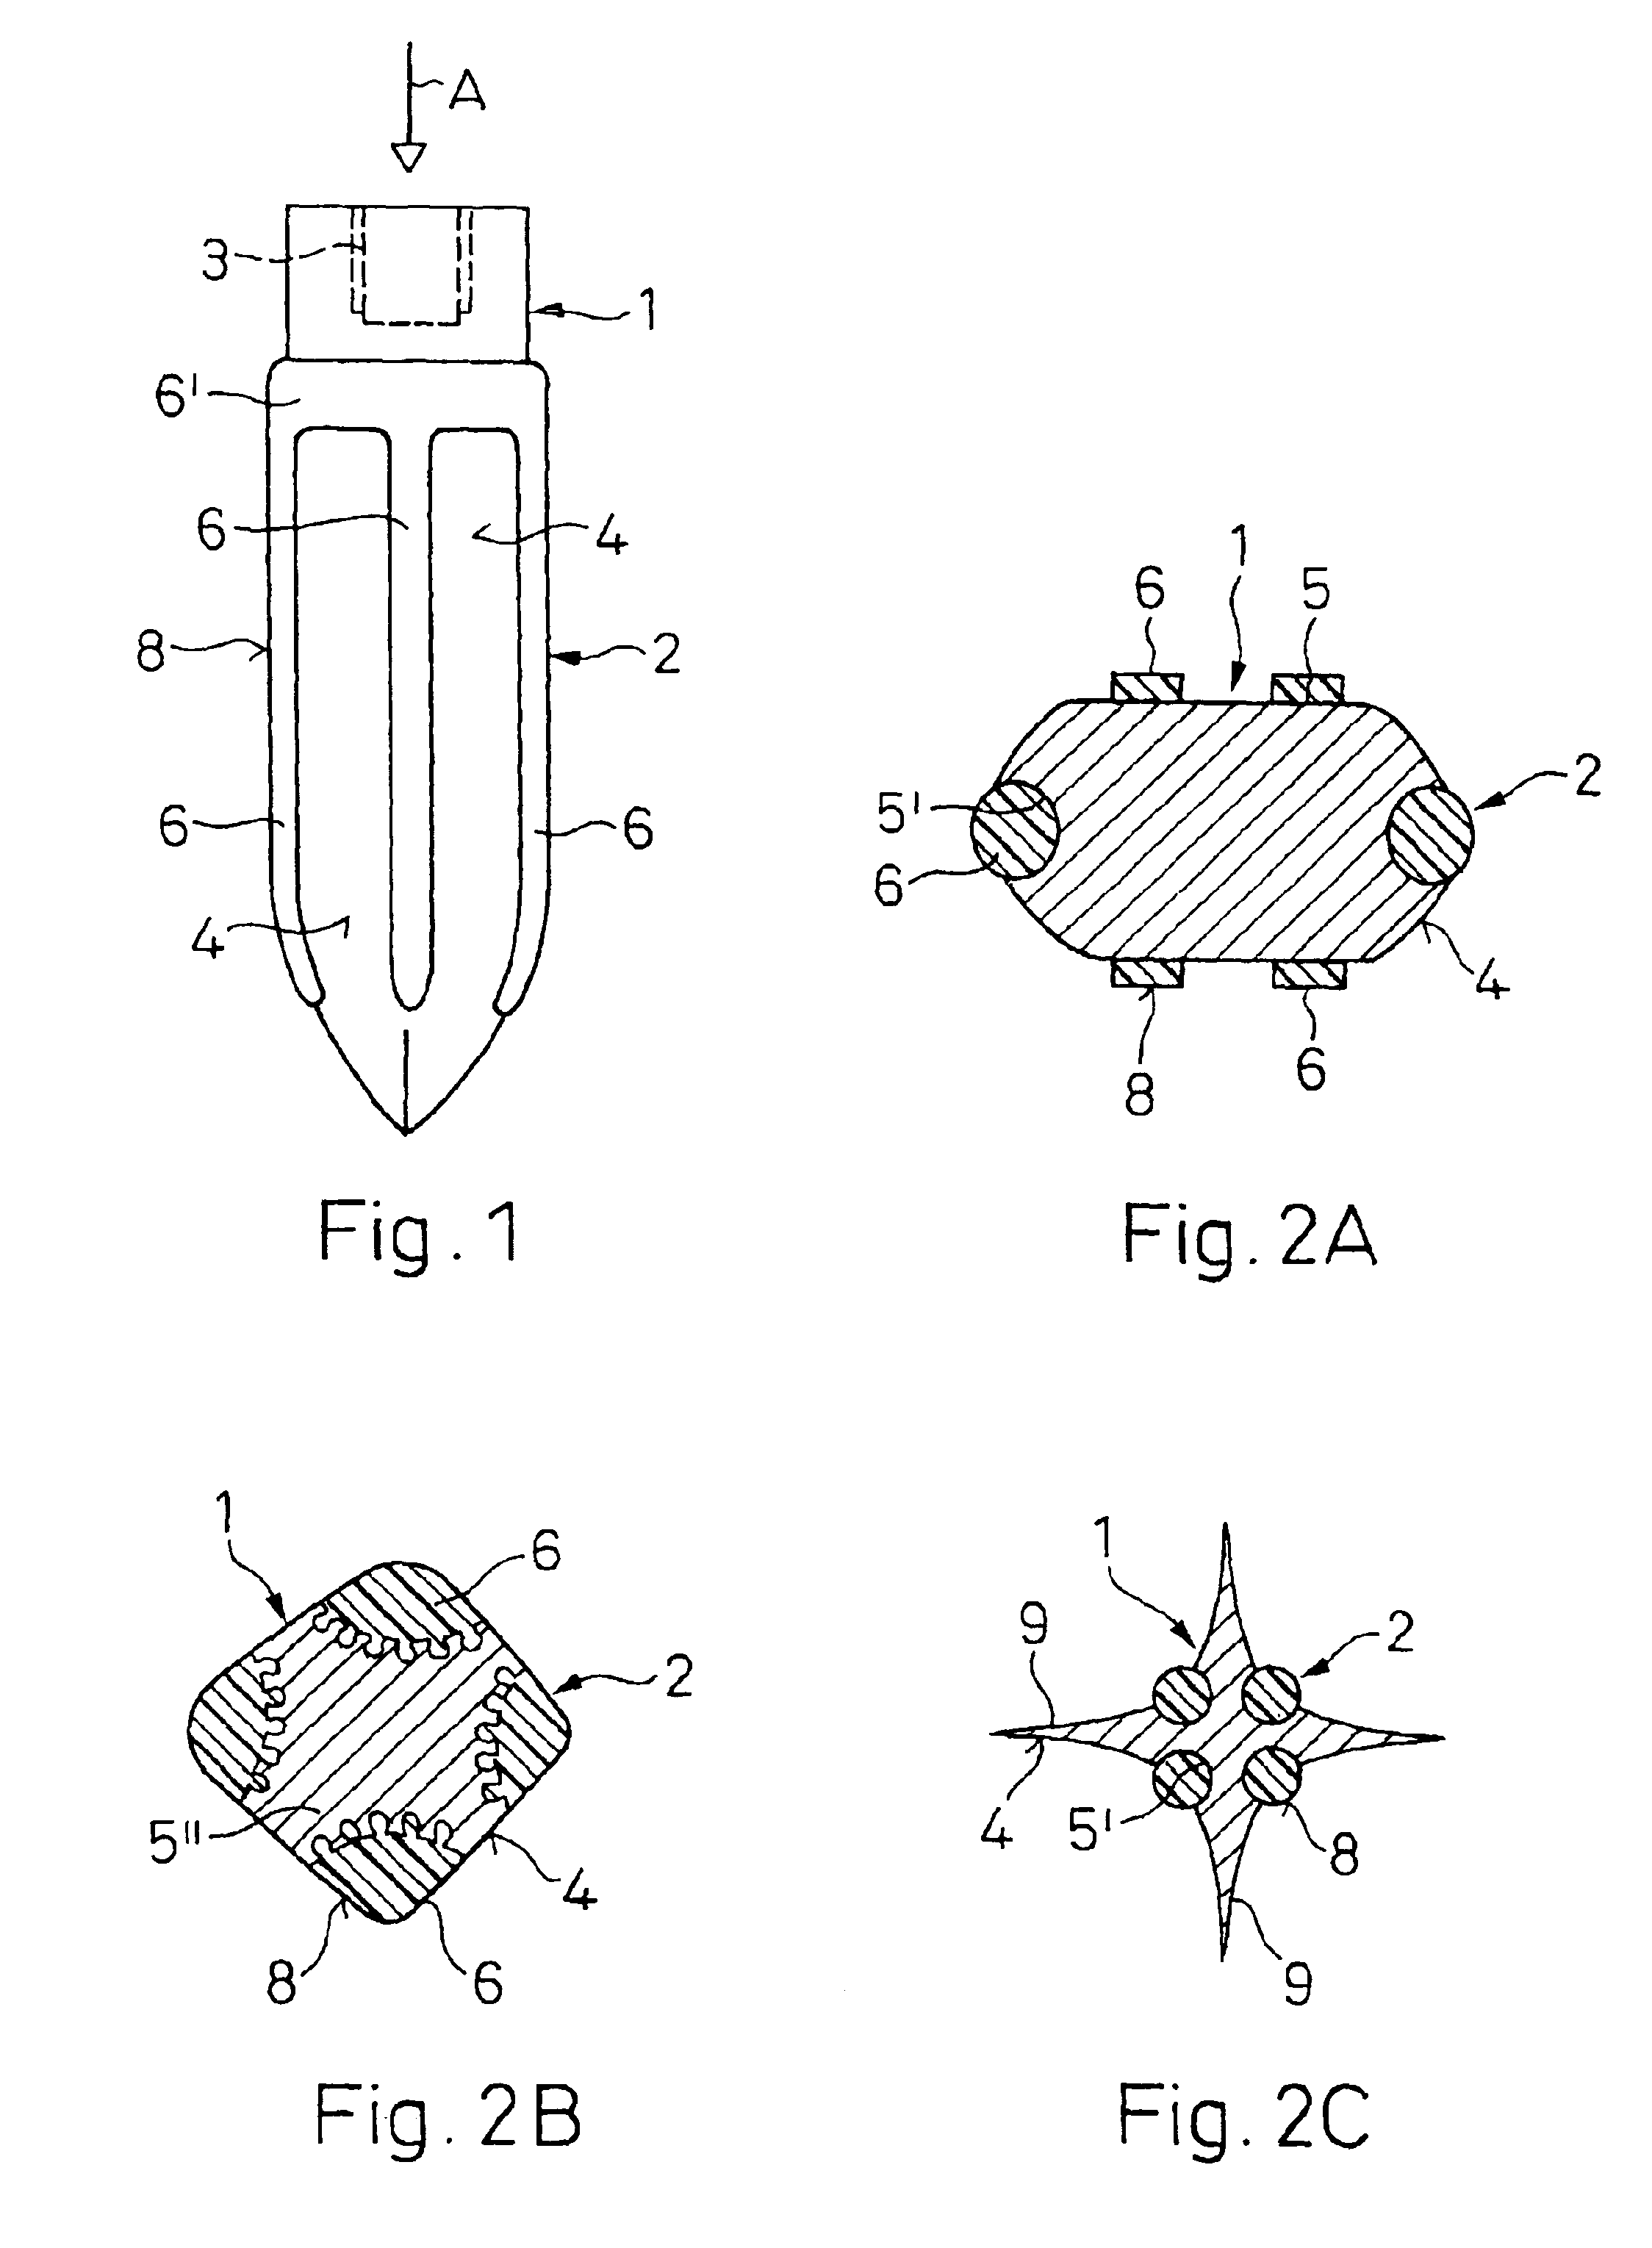 Implant to be implanted in bone tissue or in bone tissue supplemented with bone substitute material